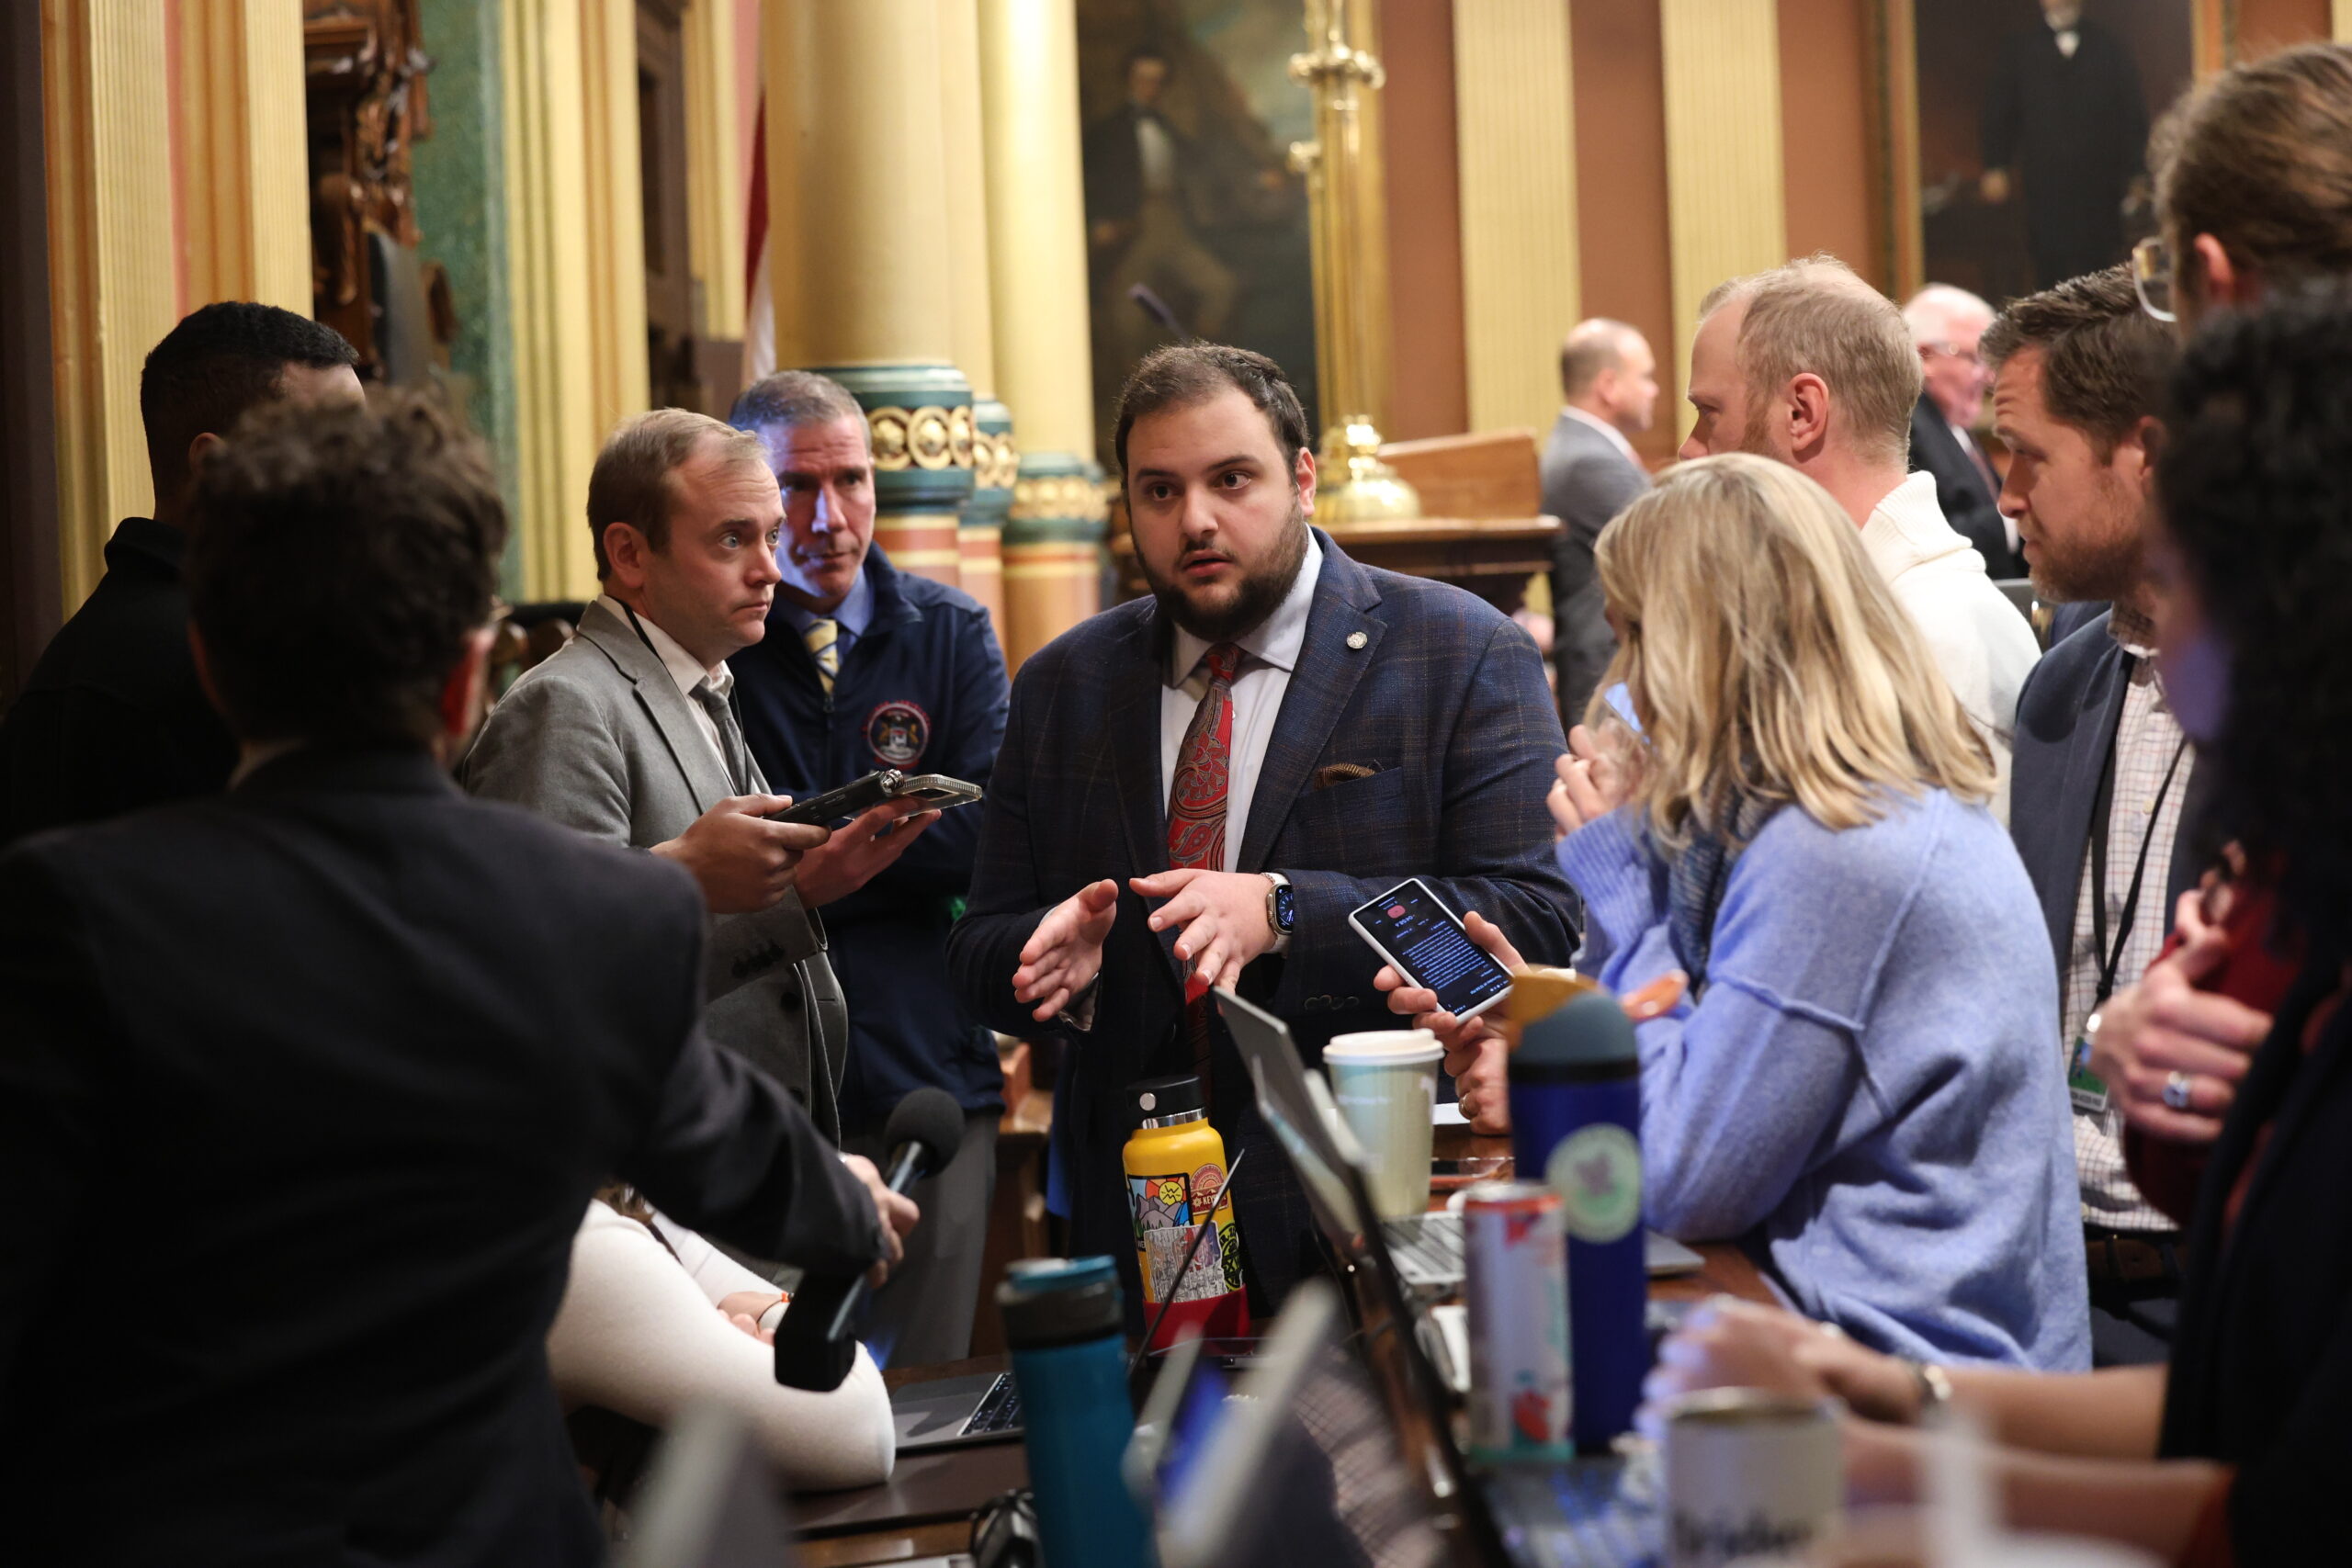 Rep. Alabas Farhat speaks with reporters in the front of the Michigan House of Representatives as Rep. Nate Shannon looks on.